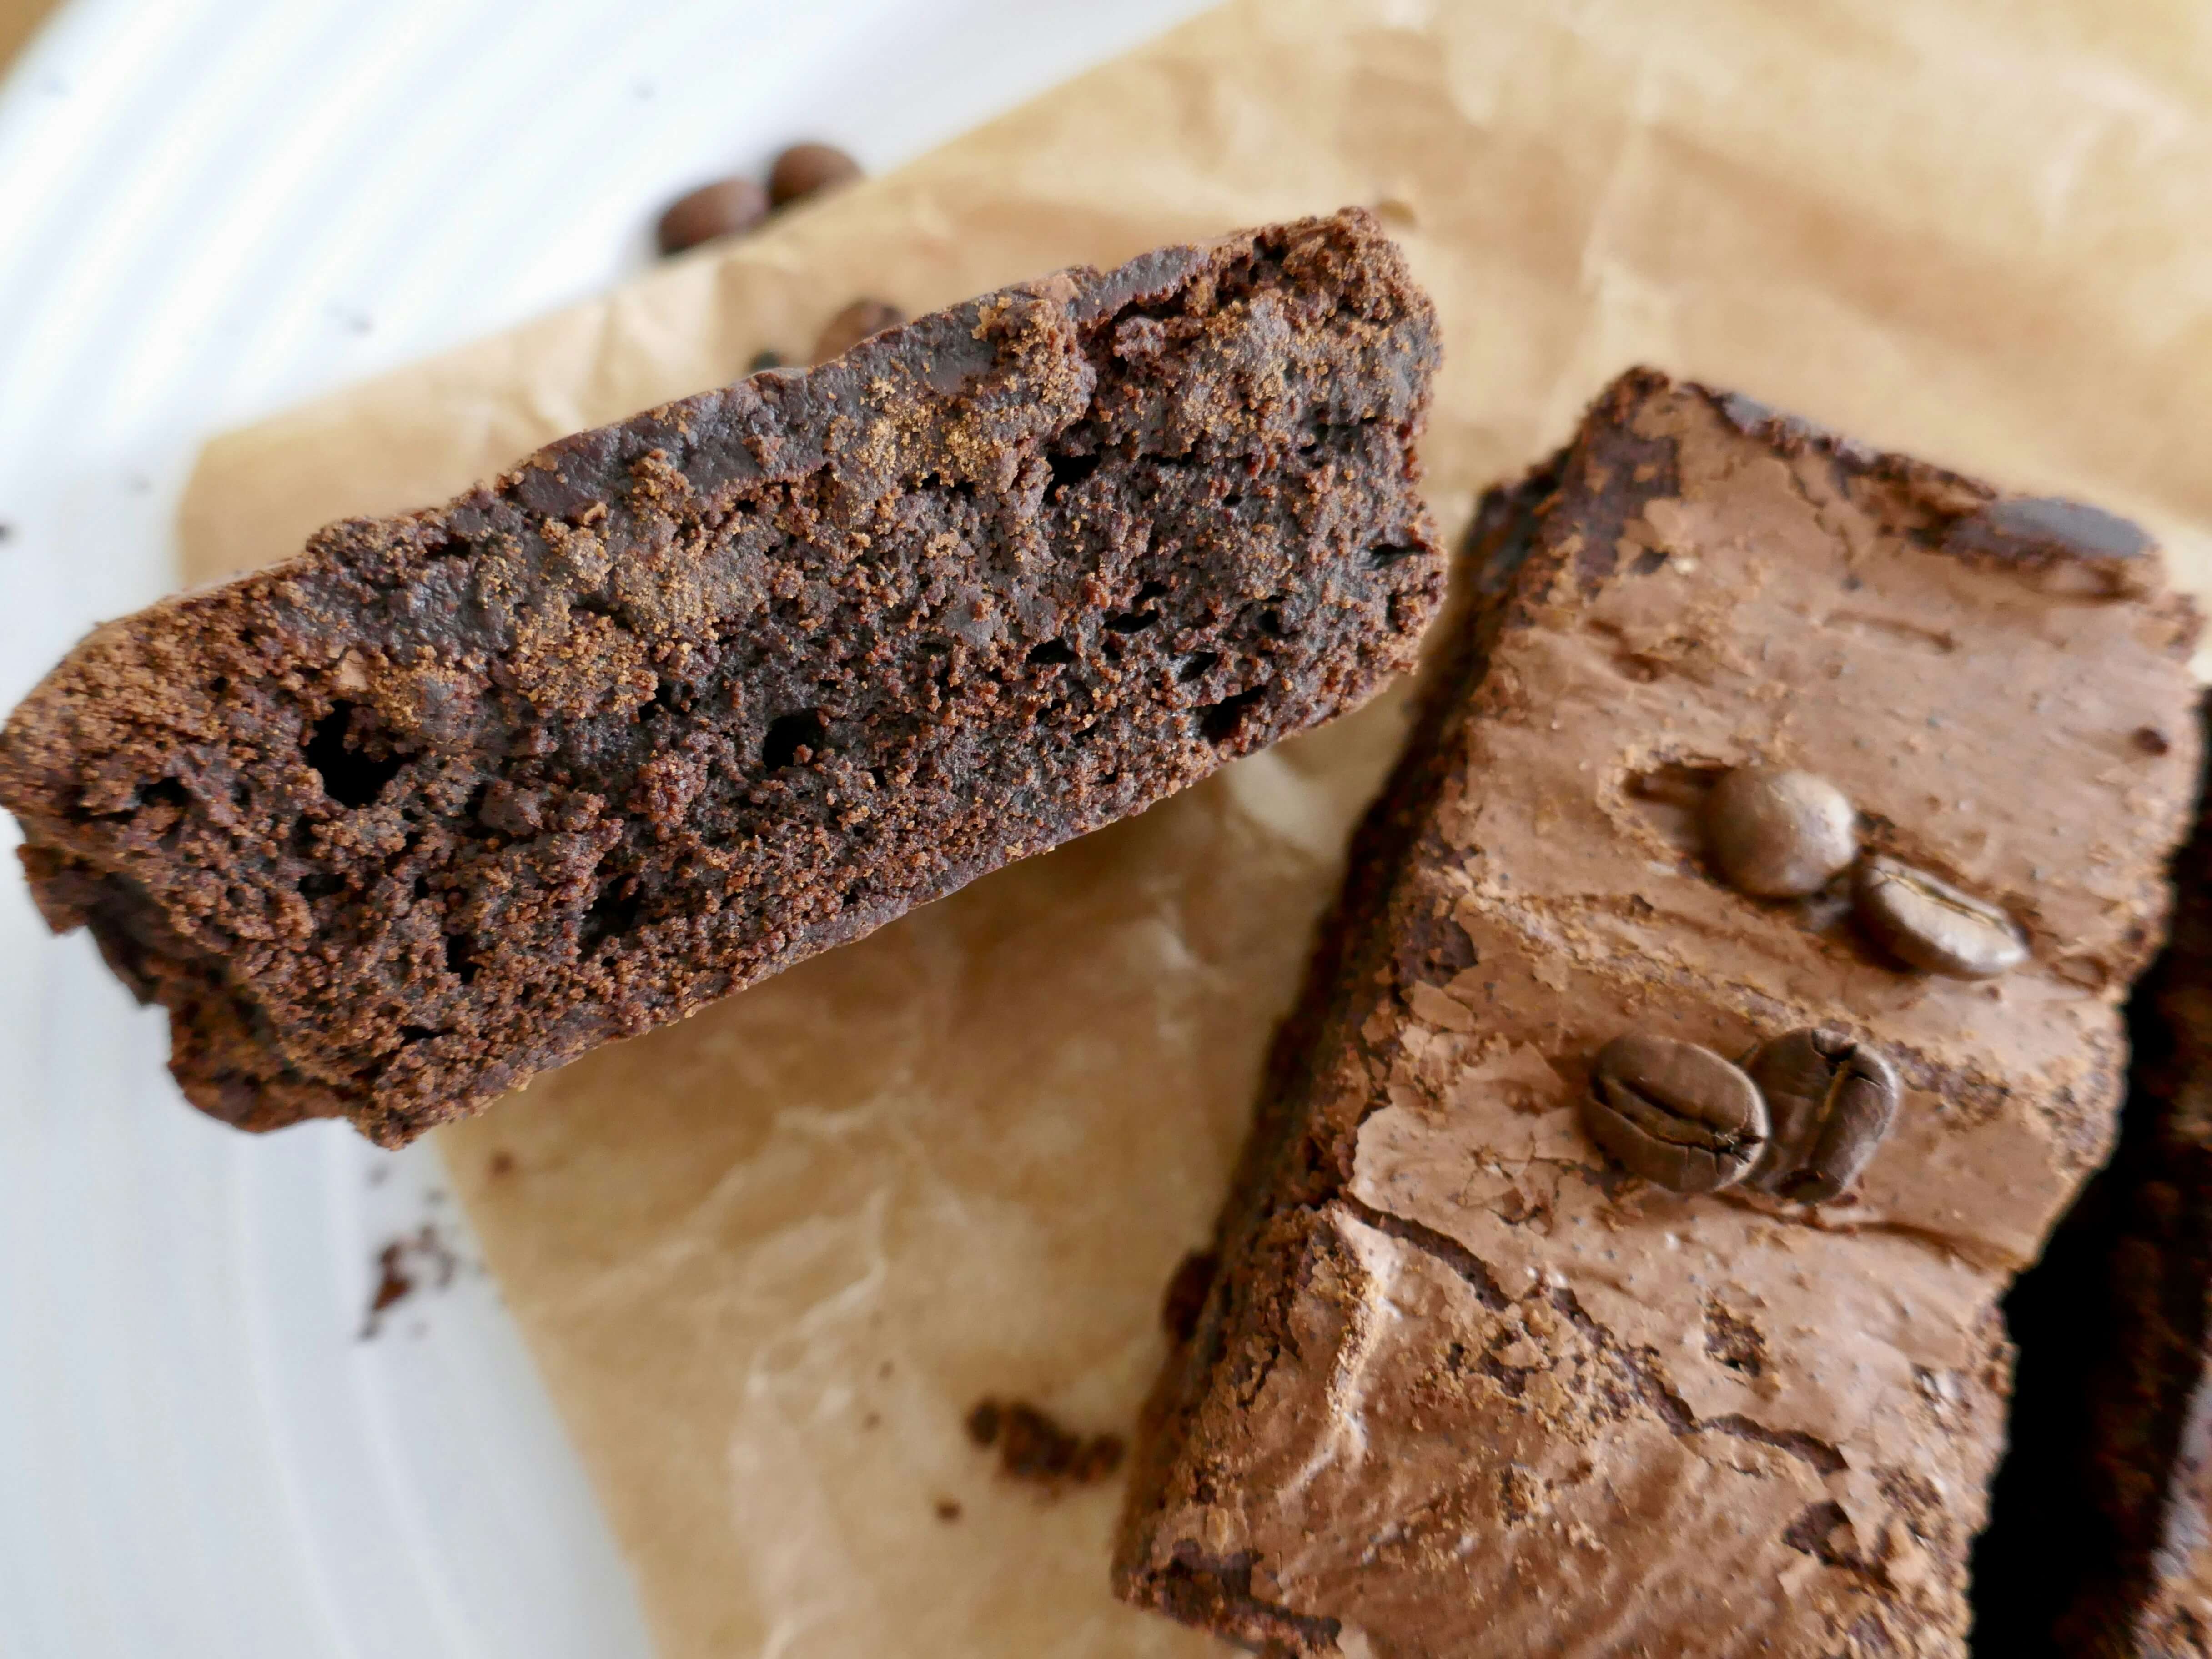 Decadent chocolate brownies on a platter